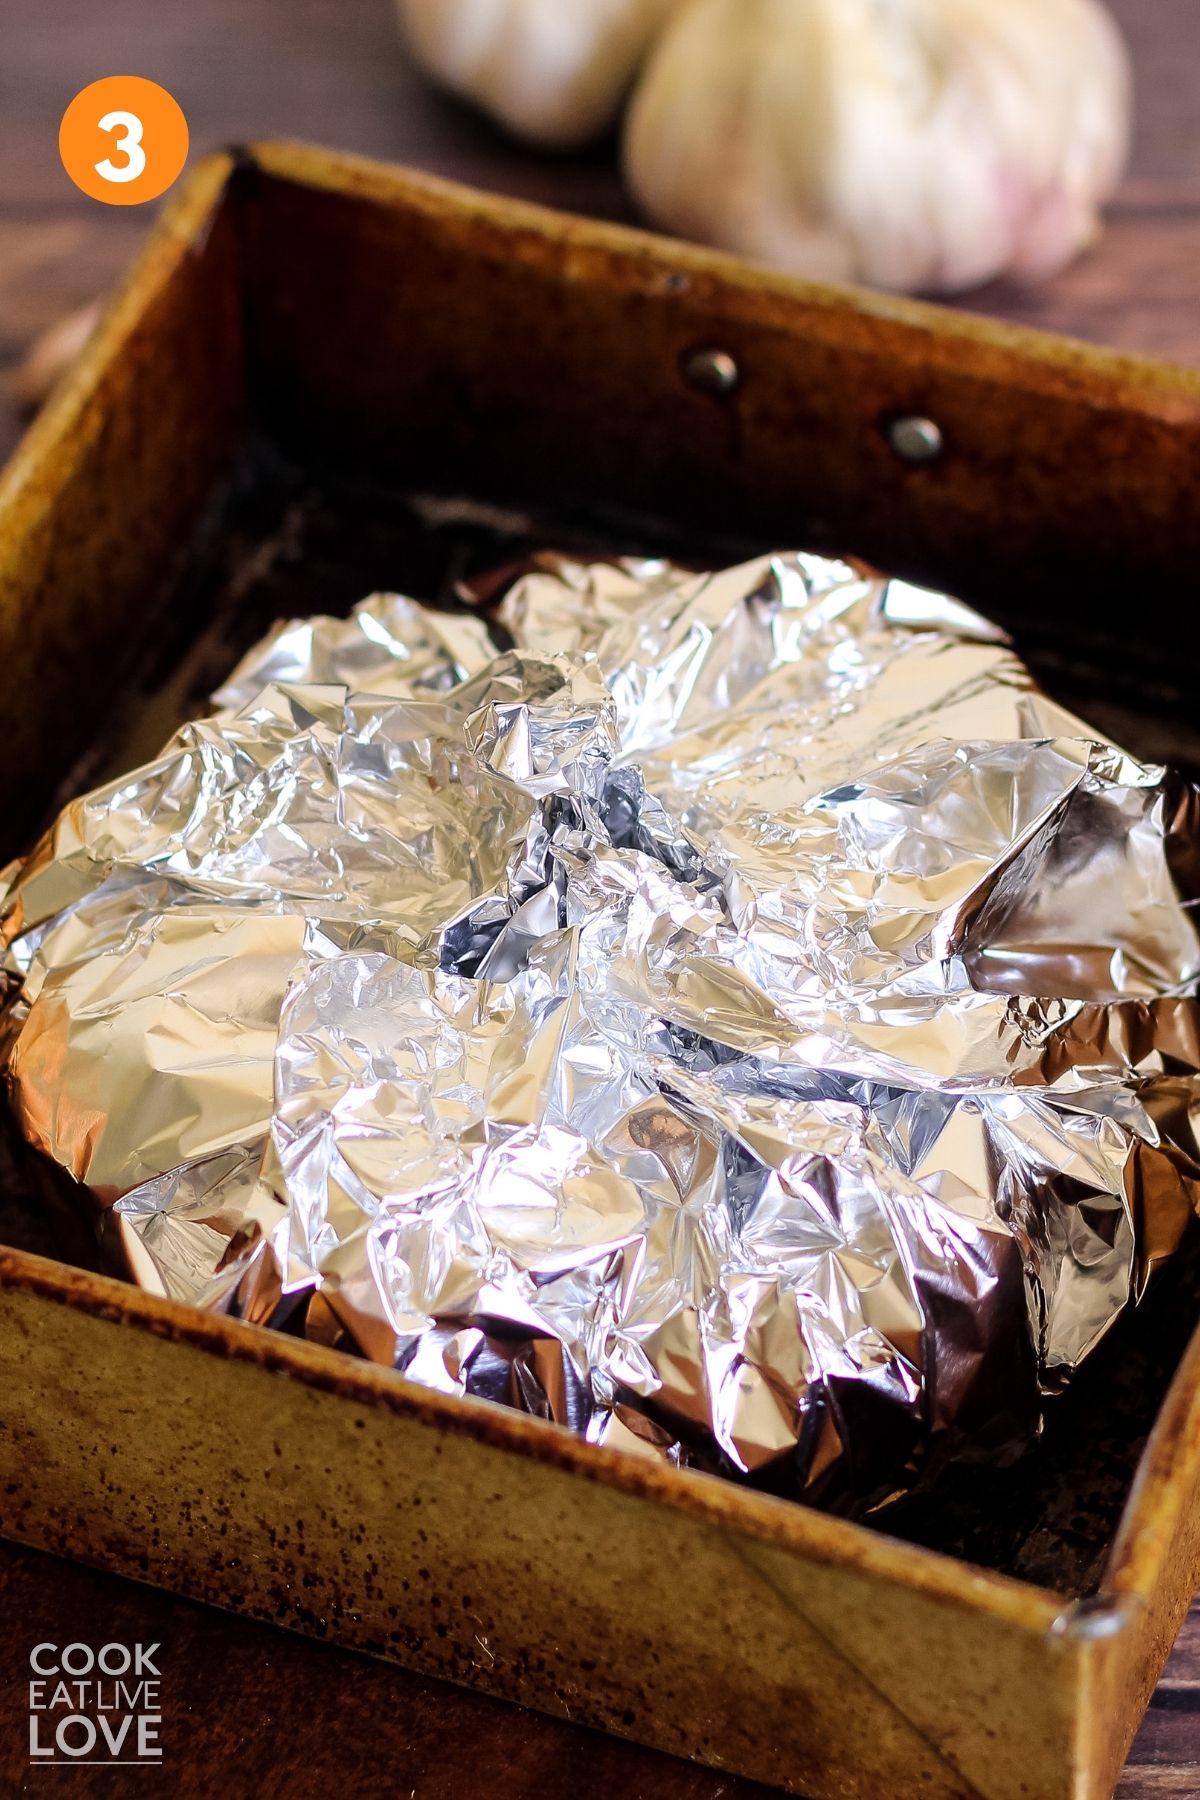 Foil is wrapped up around garlic in a baking pan.